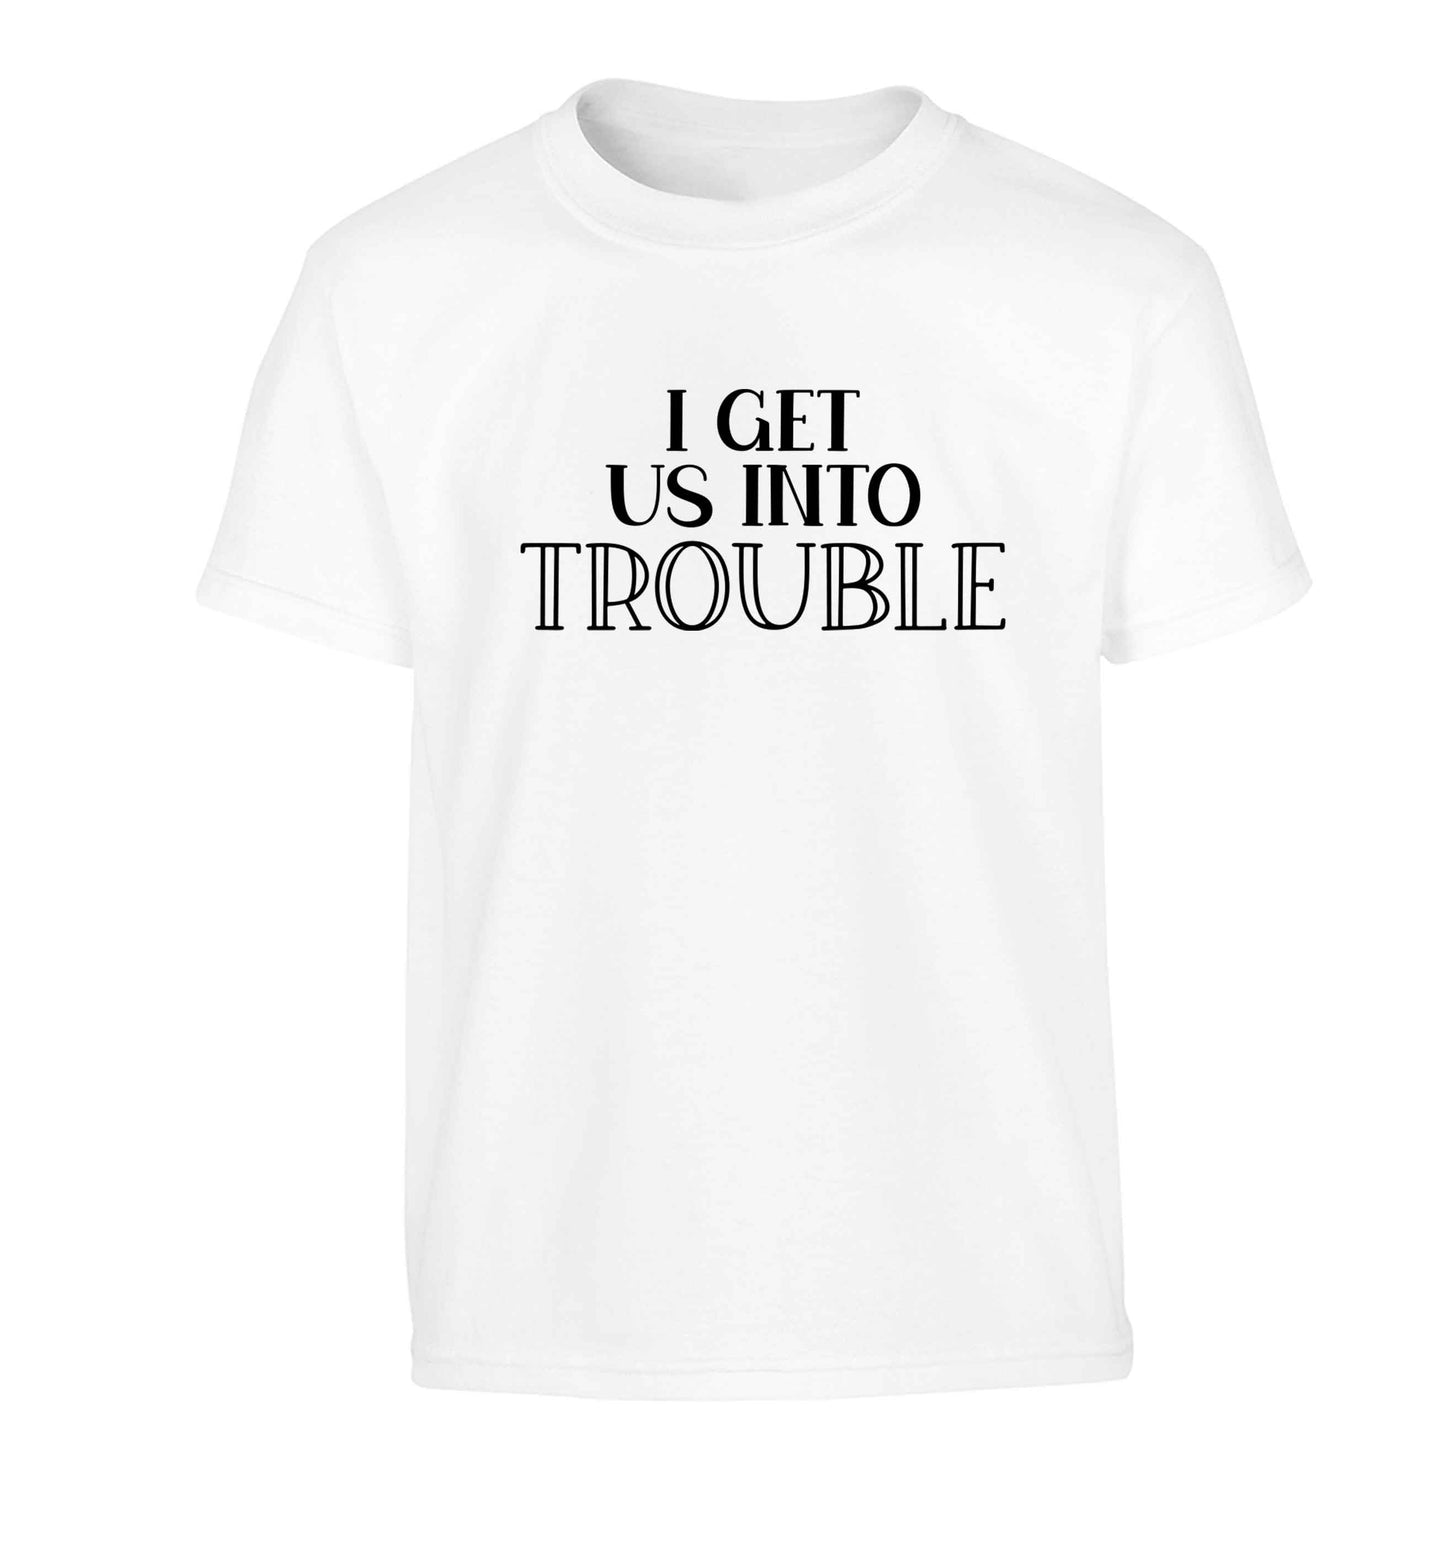 I get us into trouble Children's white Tshirt 12-13 Years